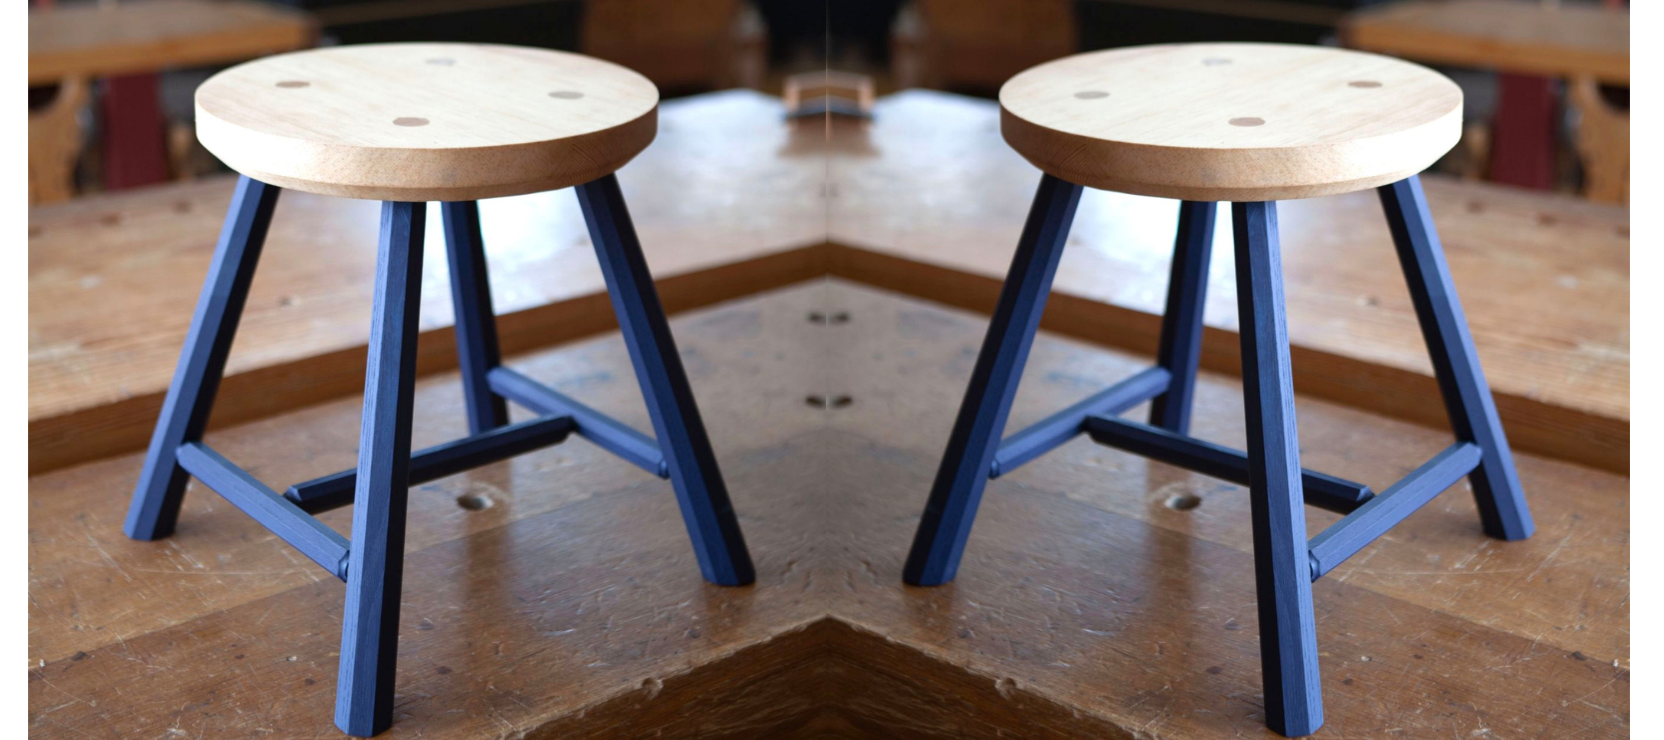 staked stools